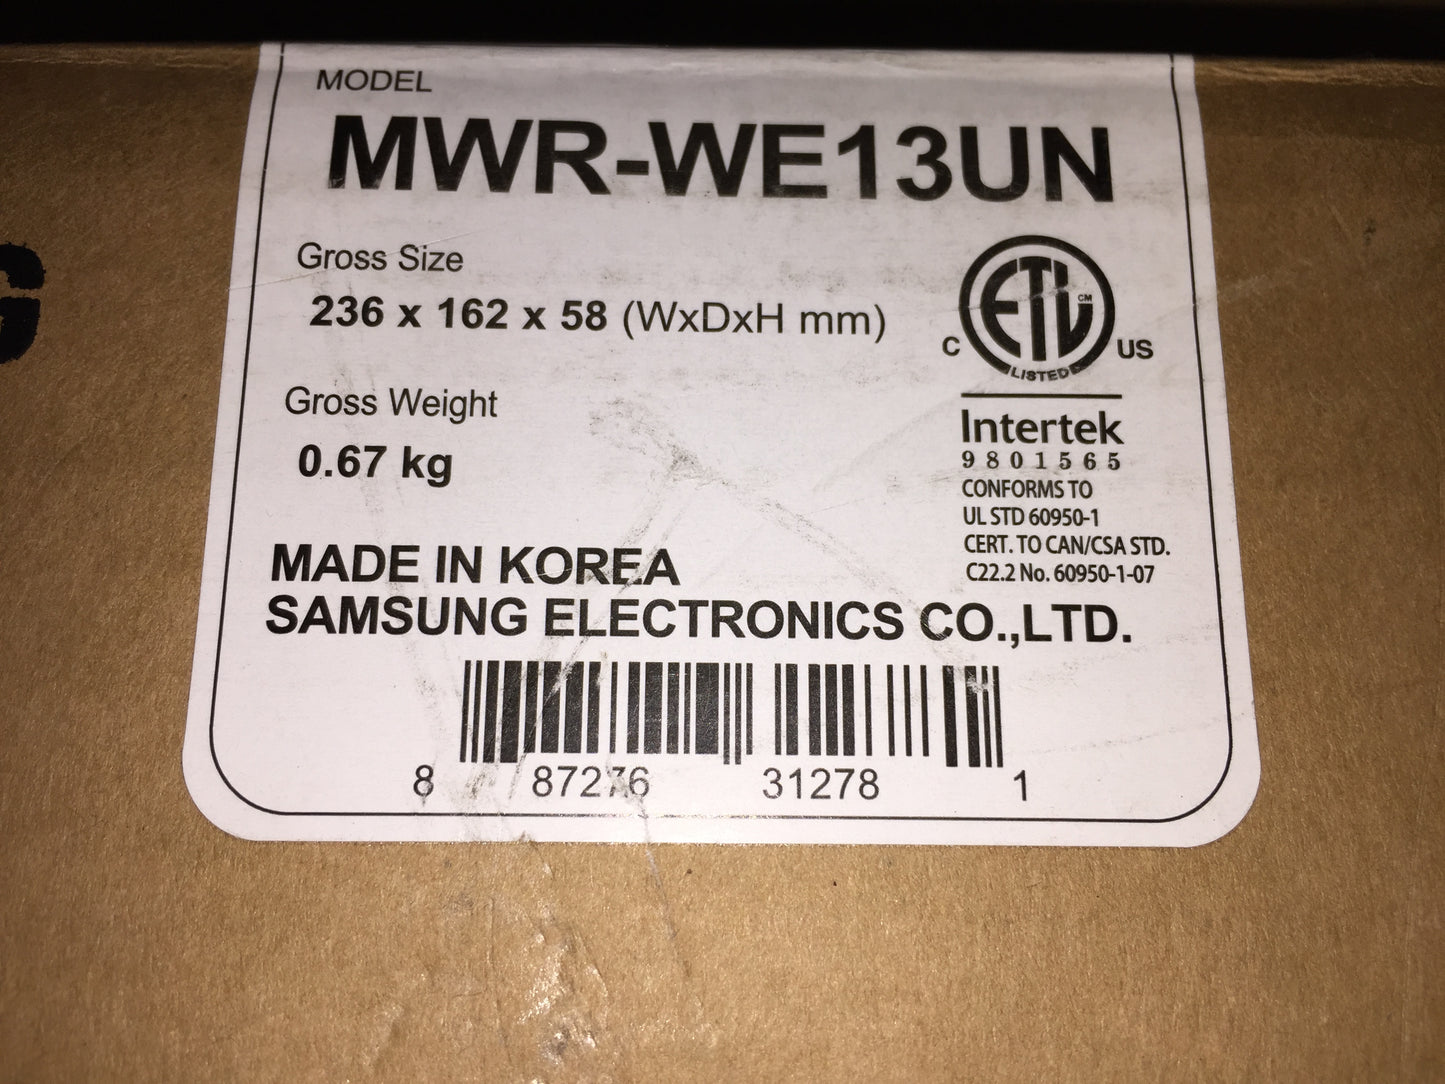 PREMIUM WIRED INDOOR UNIT CONTROLLER FOR SAMSUNG MINI SPLIT SYSTEMS